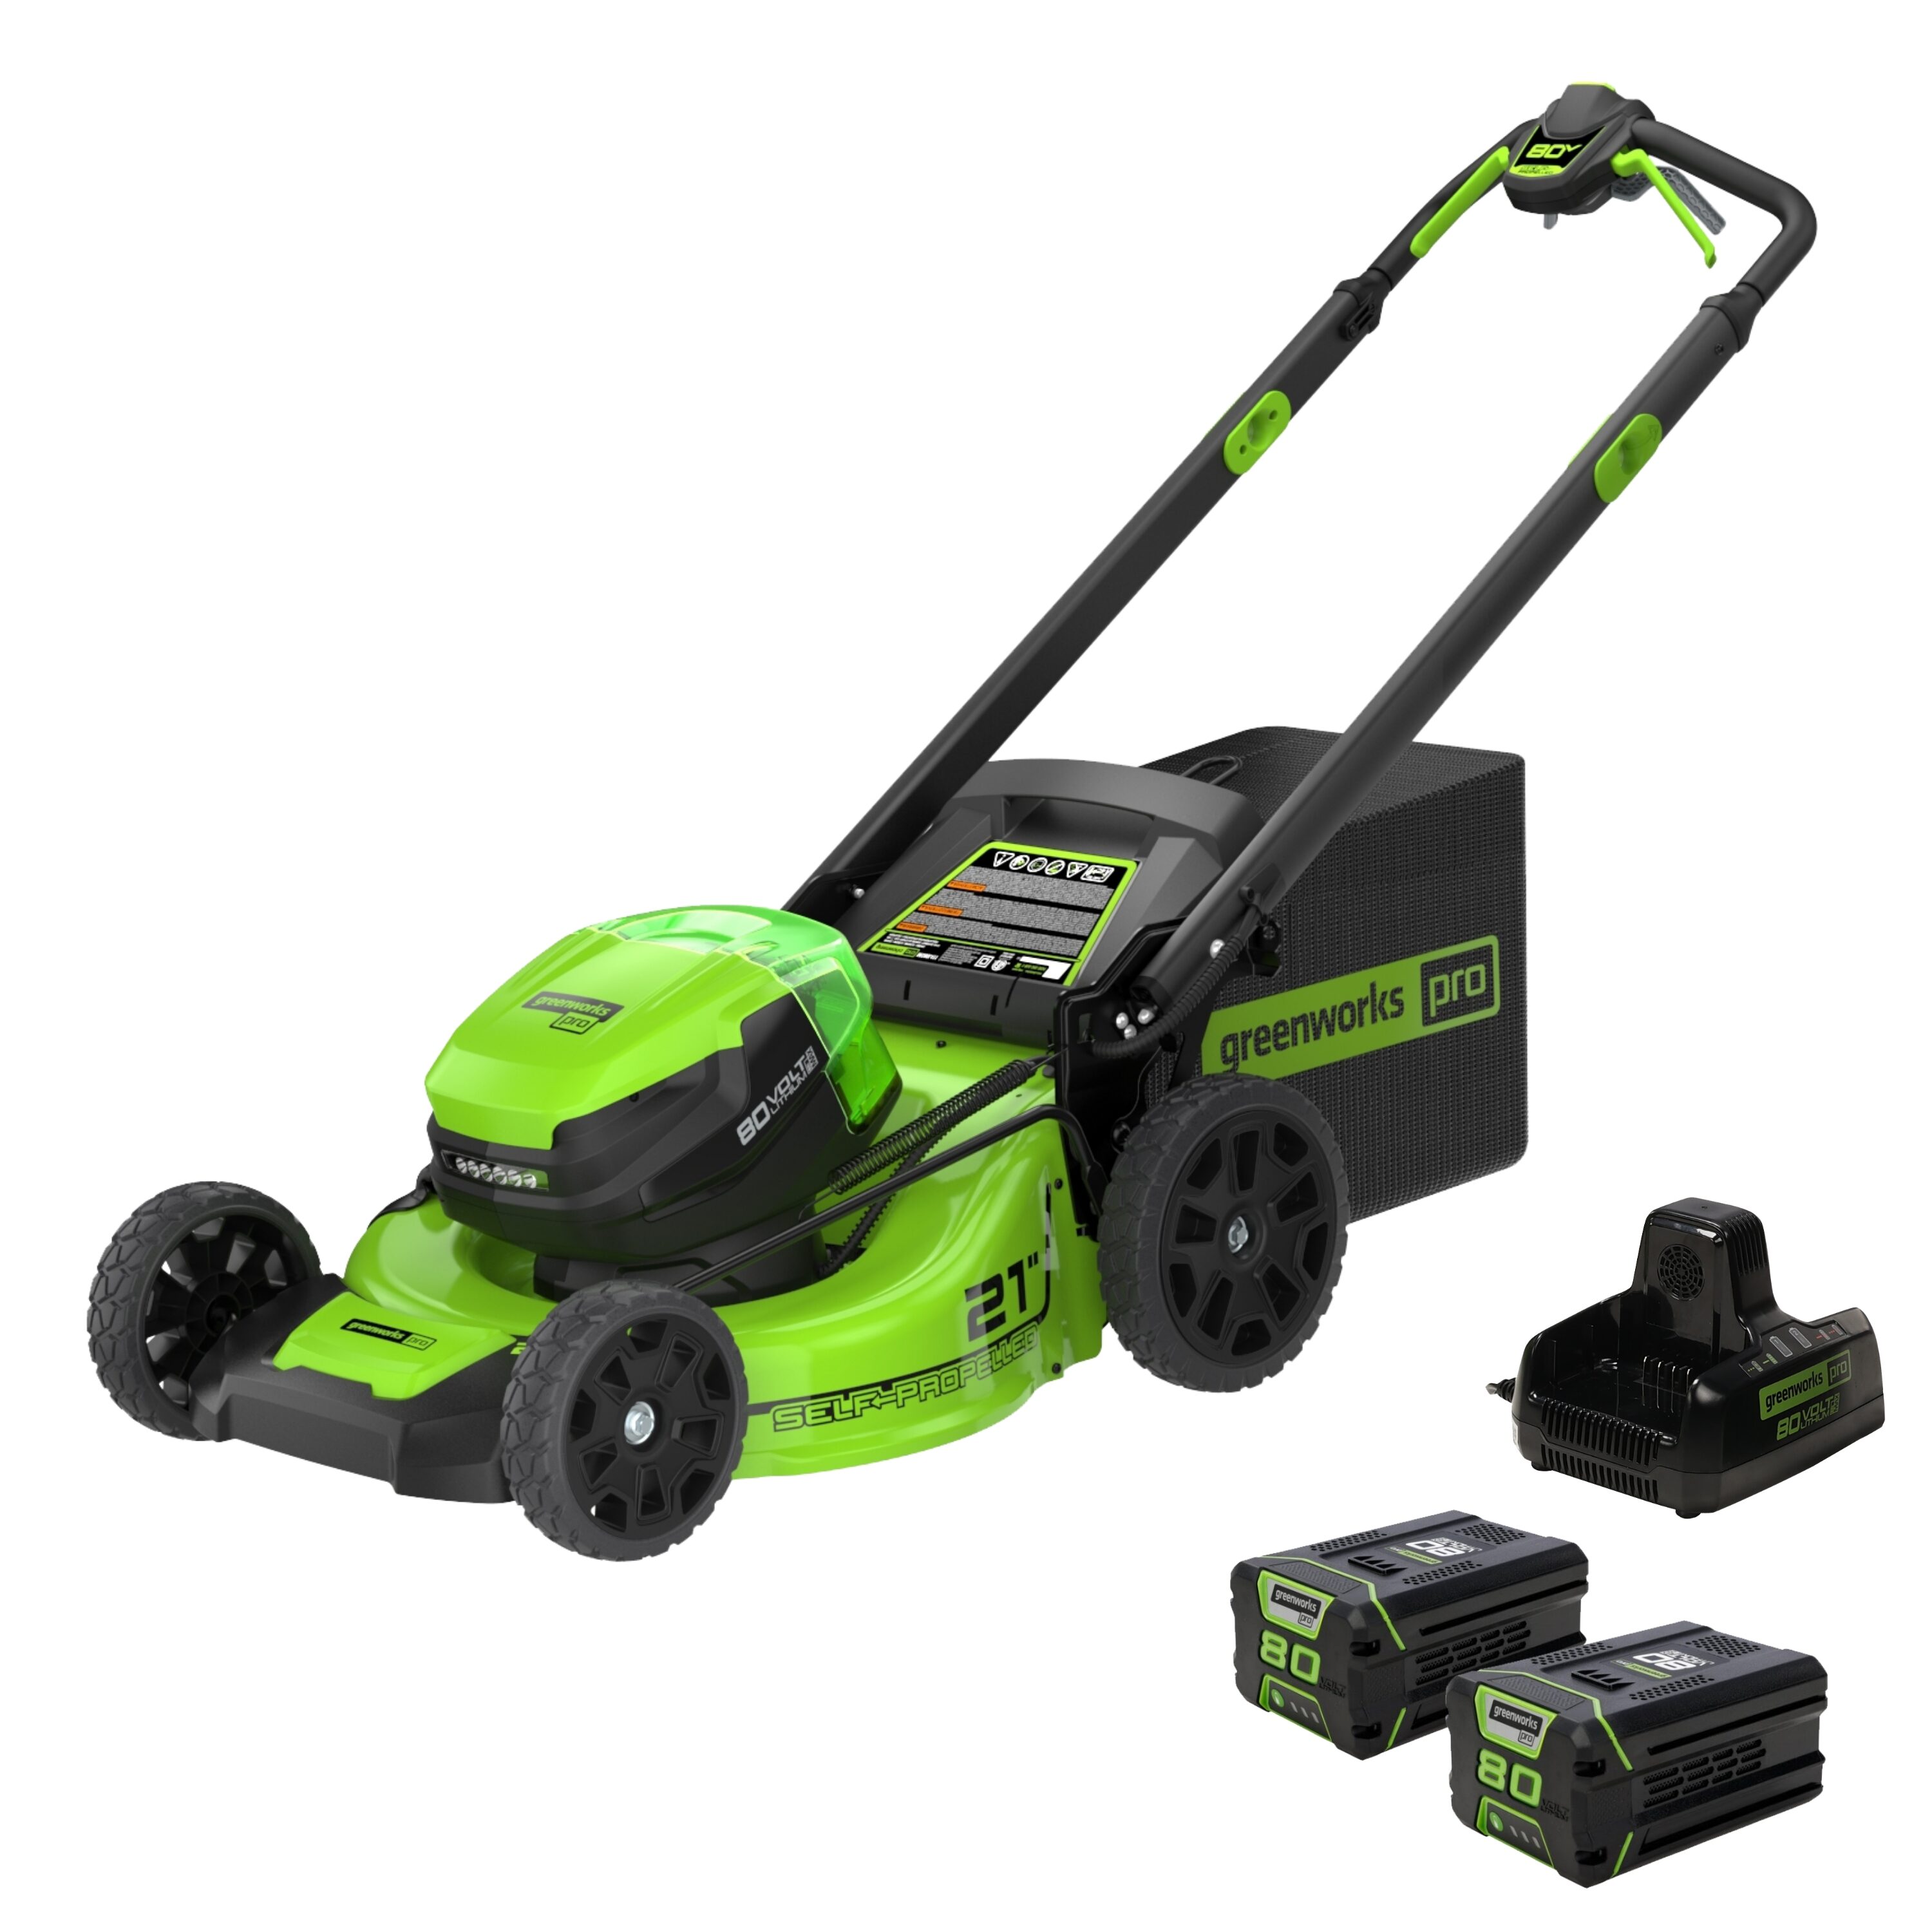 Greenworks Pro 80-volt 21-in Cordless Self-propelled Lawn Mower 8